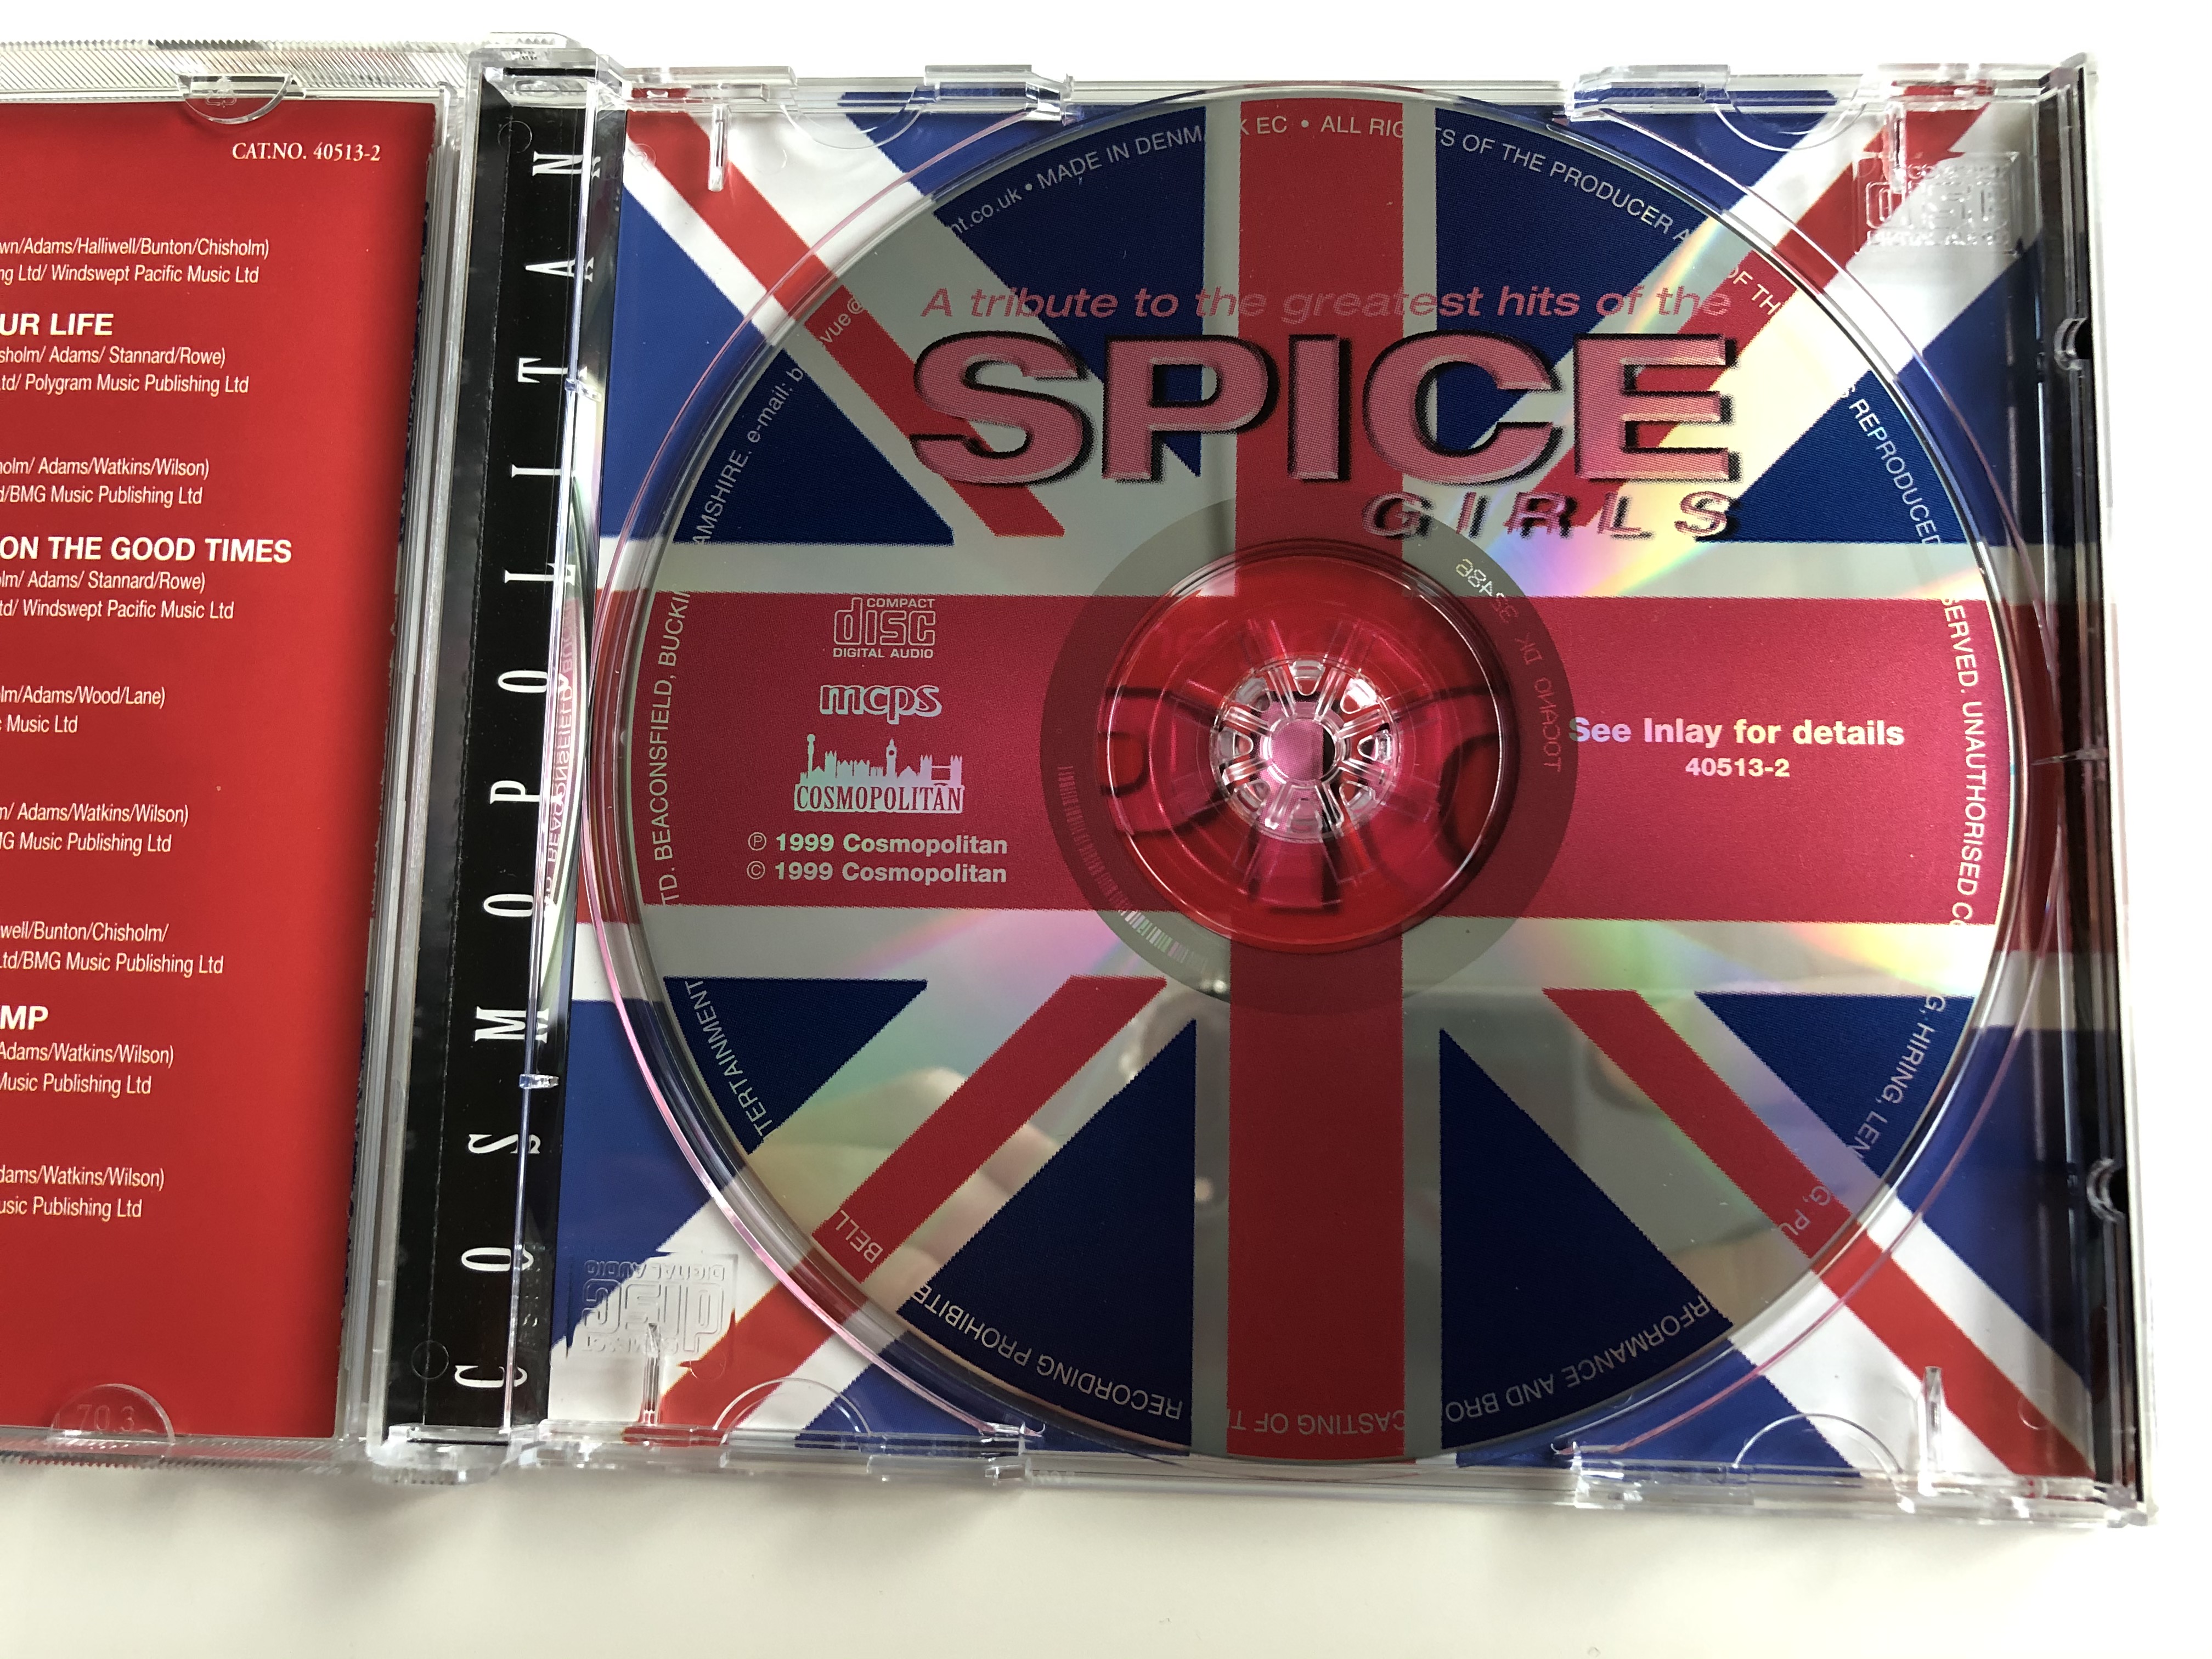 a-tribute-to-the-greatest-hits-of-the-spice-girls-performed-by-absolute-girl-power-too-much-stop-spice-up-your-life-2-become-1-cosmopolitan-audio-cd-1999-40513-2-3-.jpg